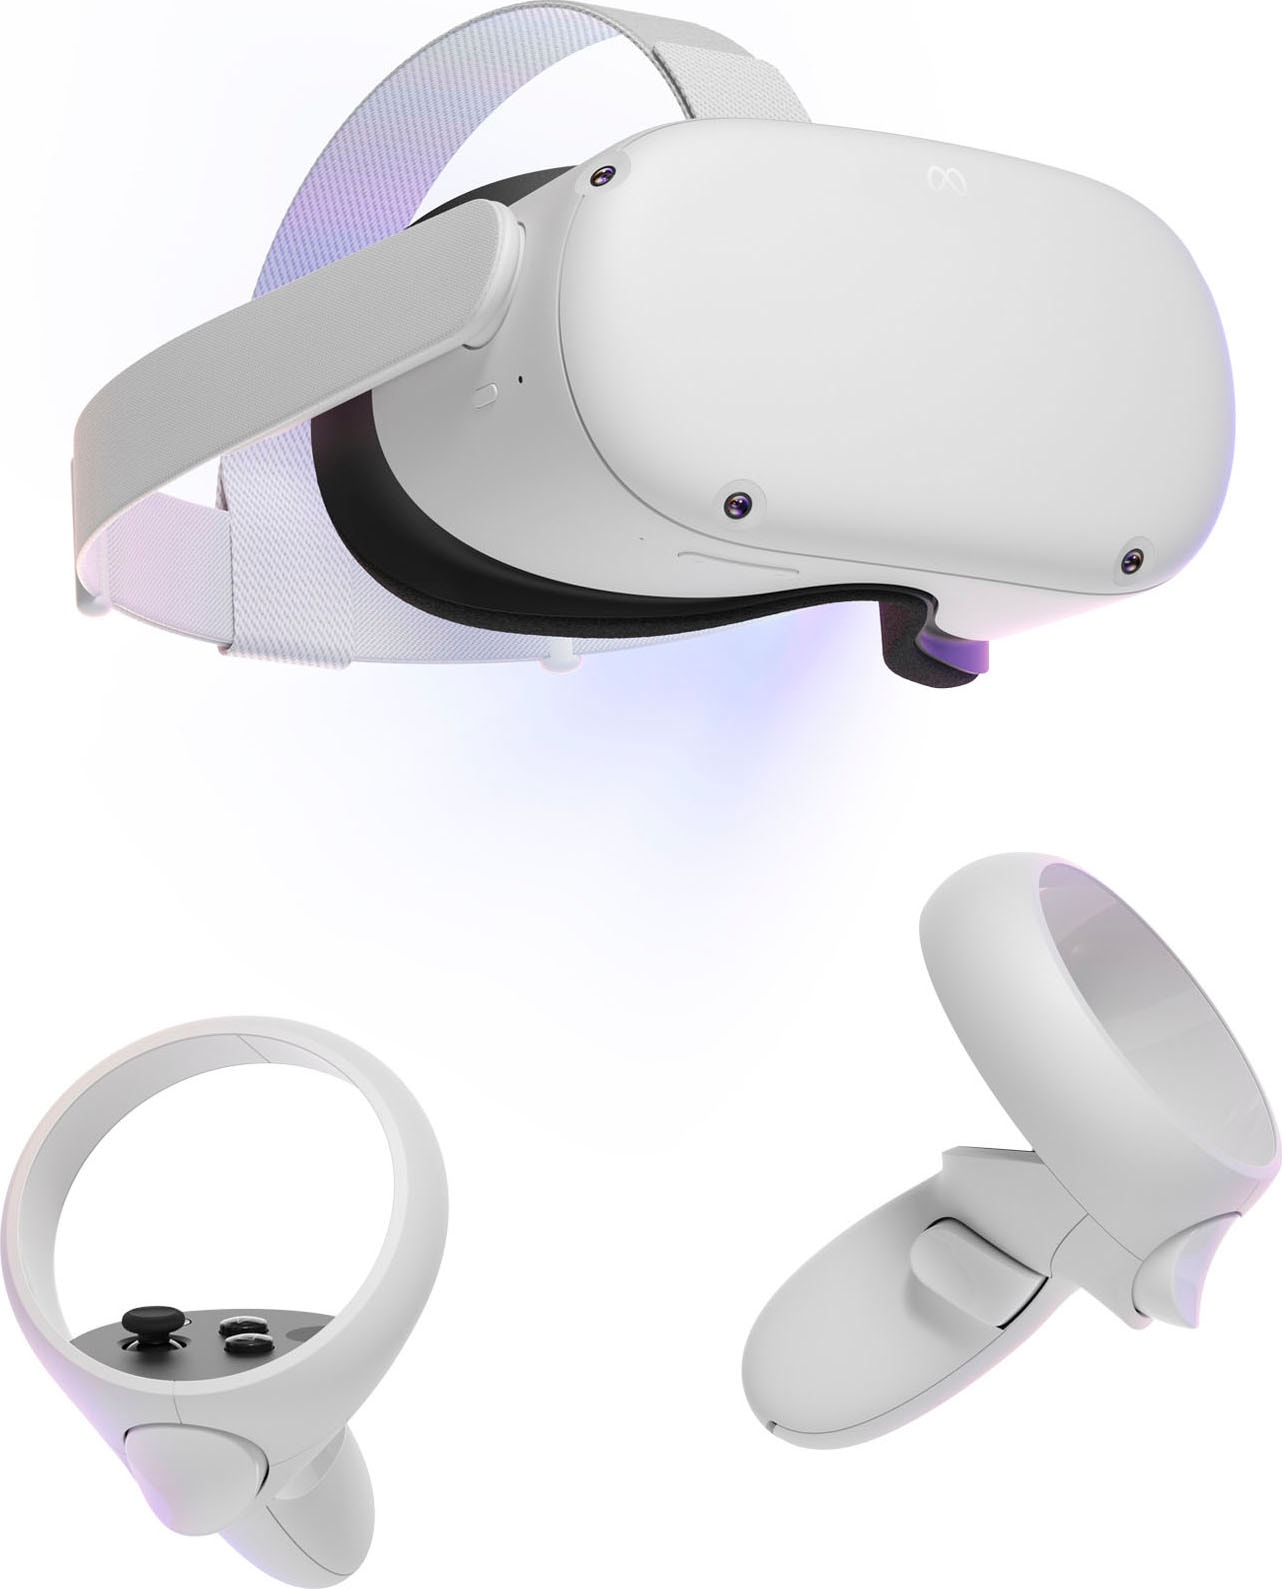 Meta Quest Virtual-Reality-Brille »Quest 2 128 GB«